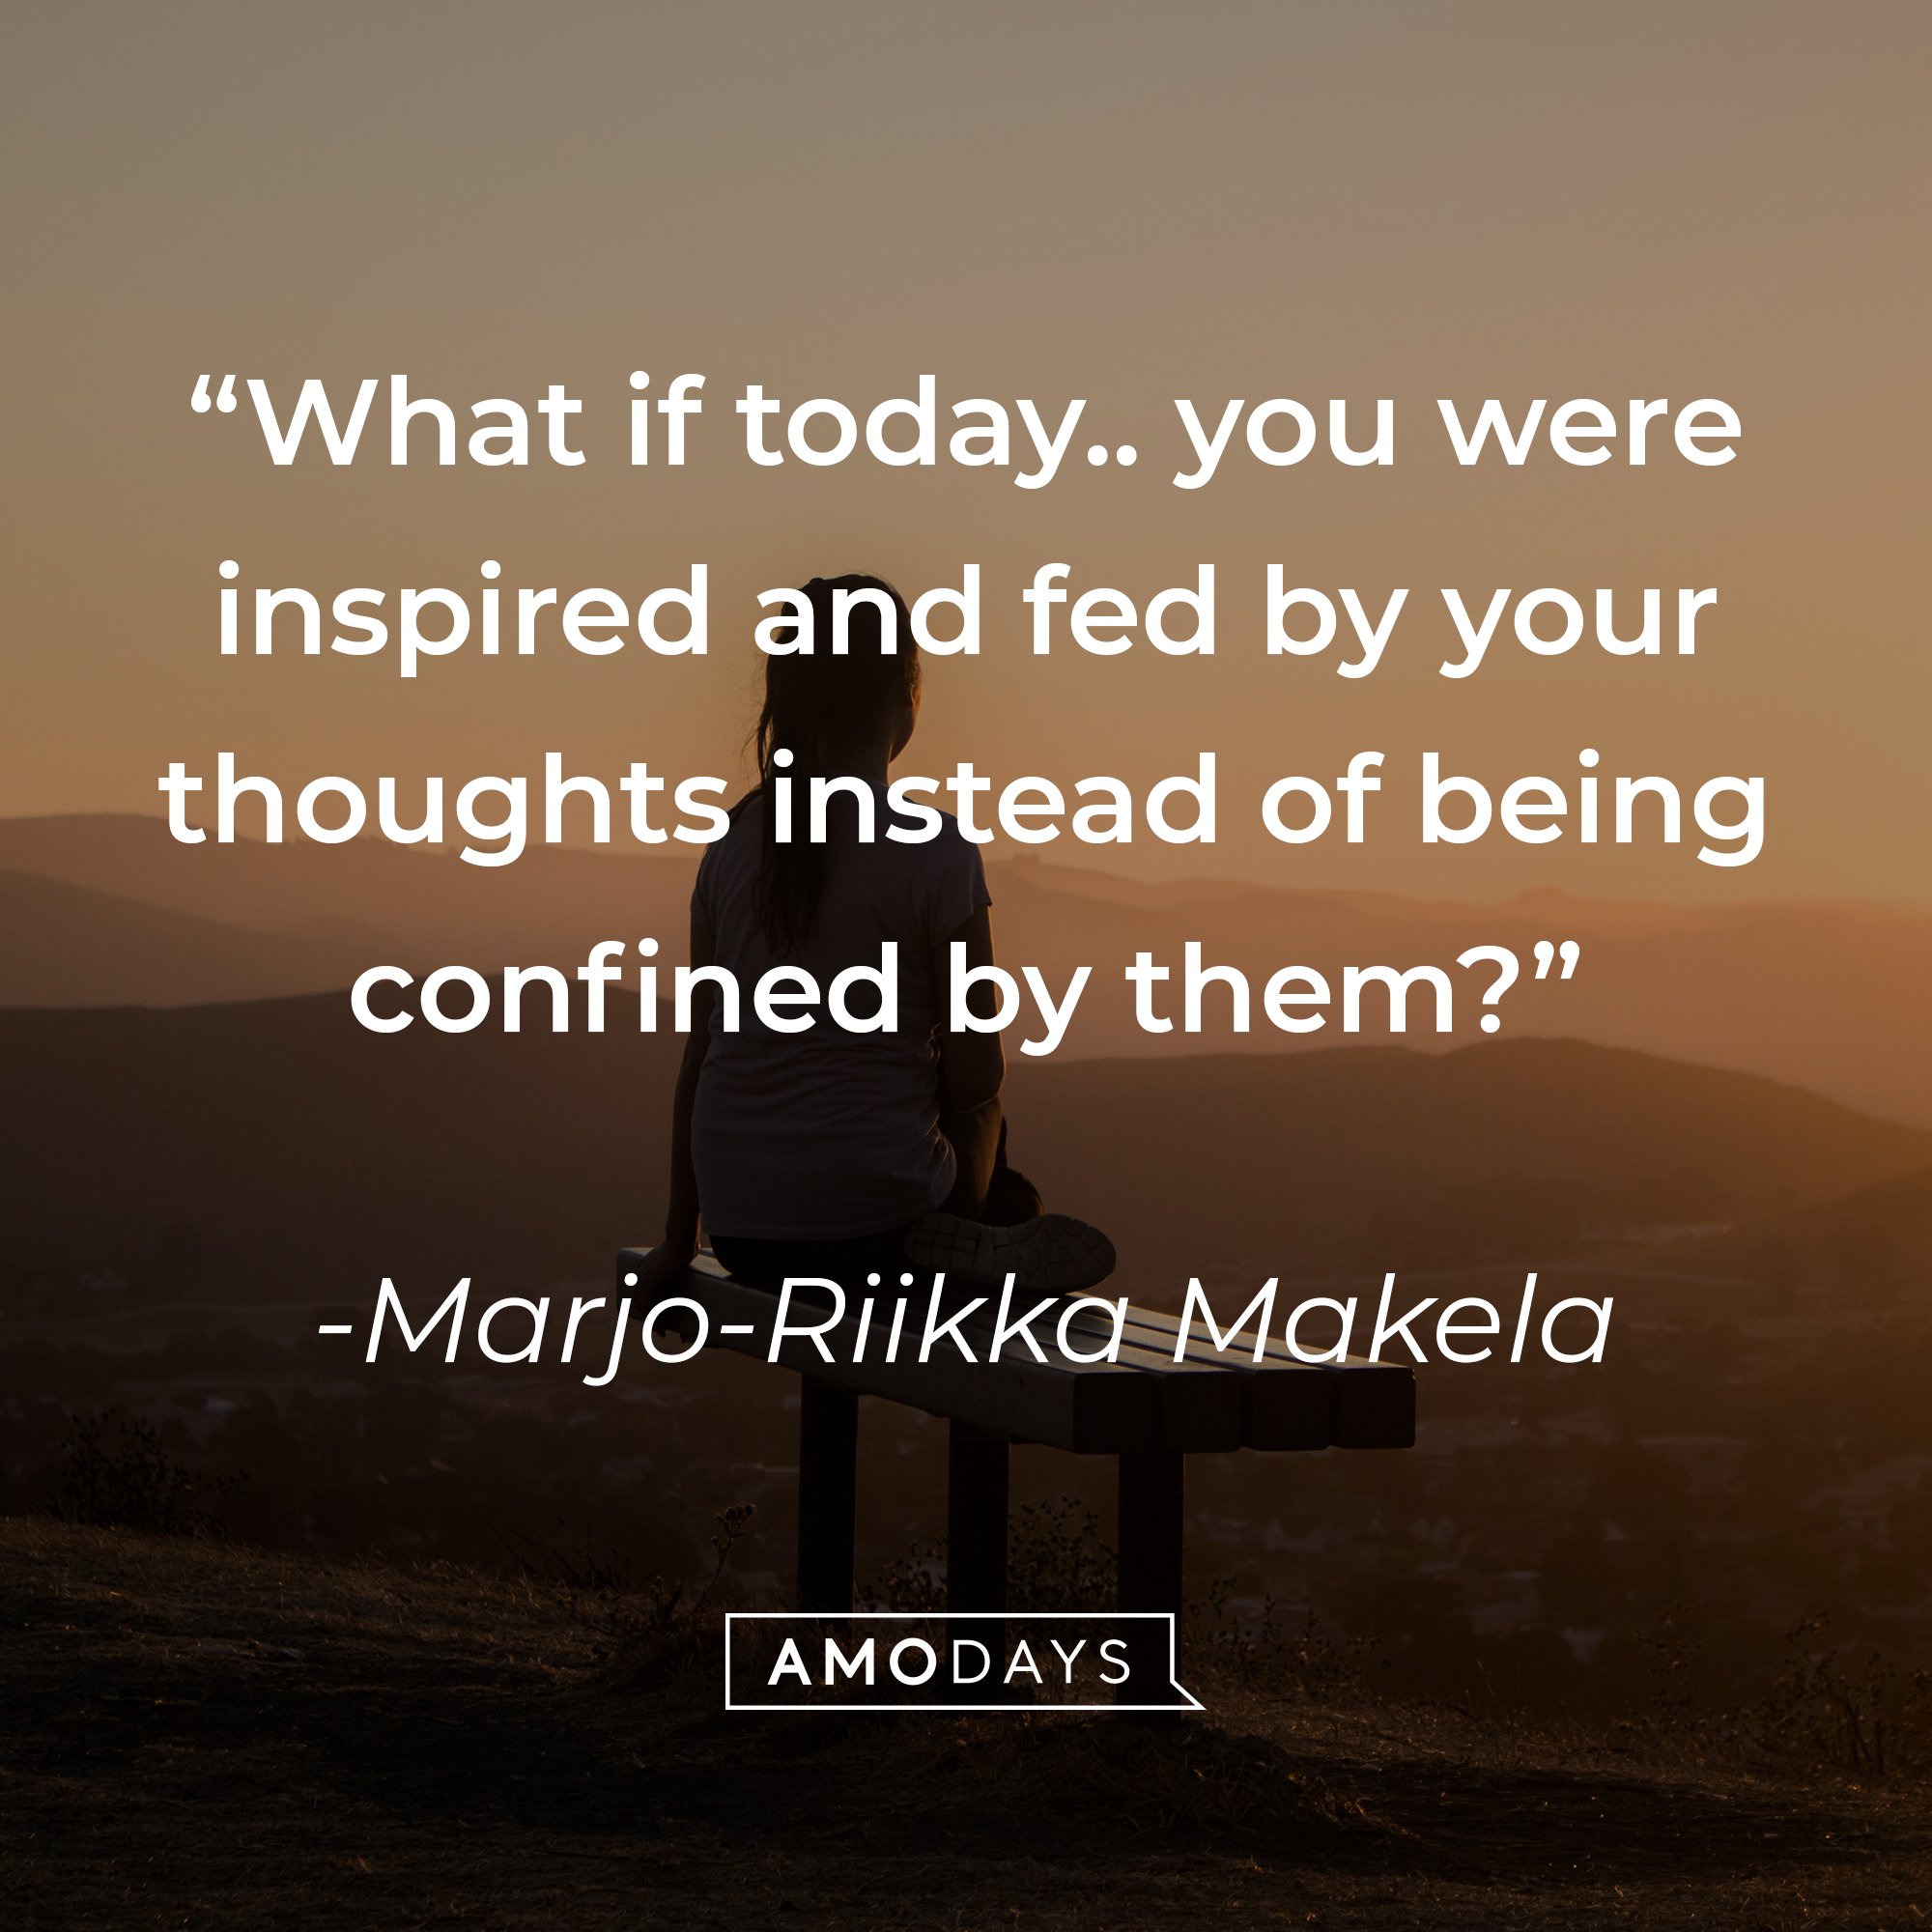 Marjo-Rikka Makela's quote: "What if today.. you were inspired and fed by your thoughts instead of being confined by them?" | Image: AmoDays